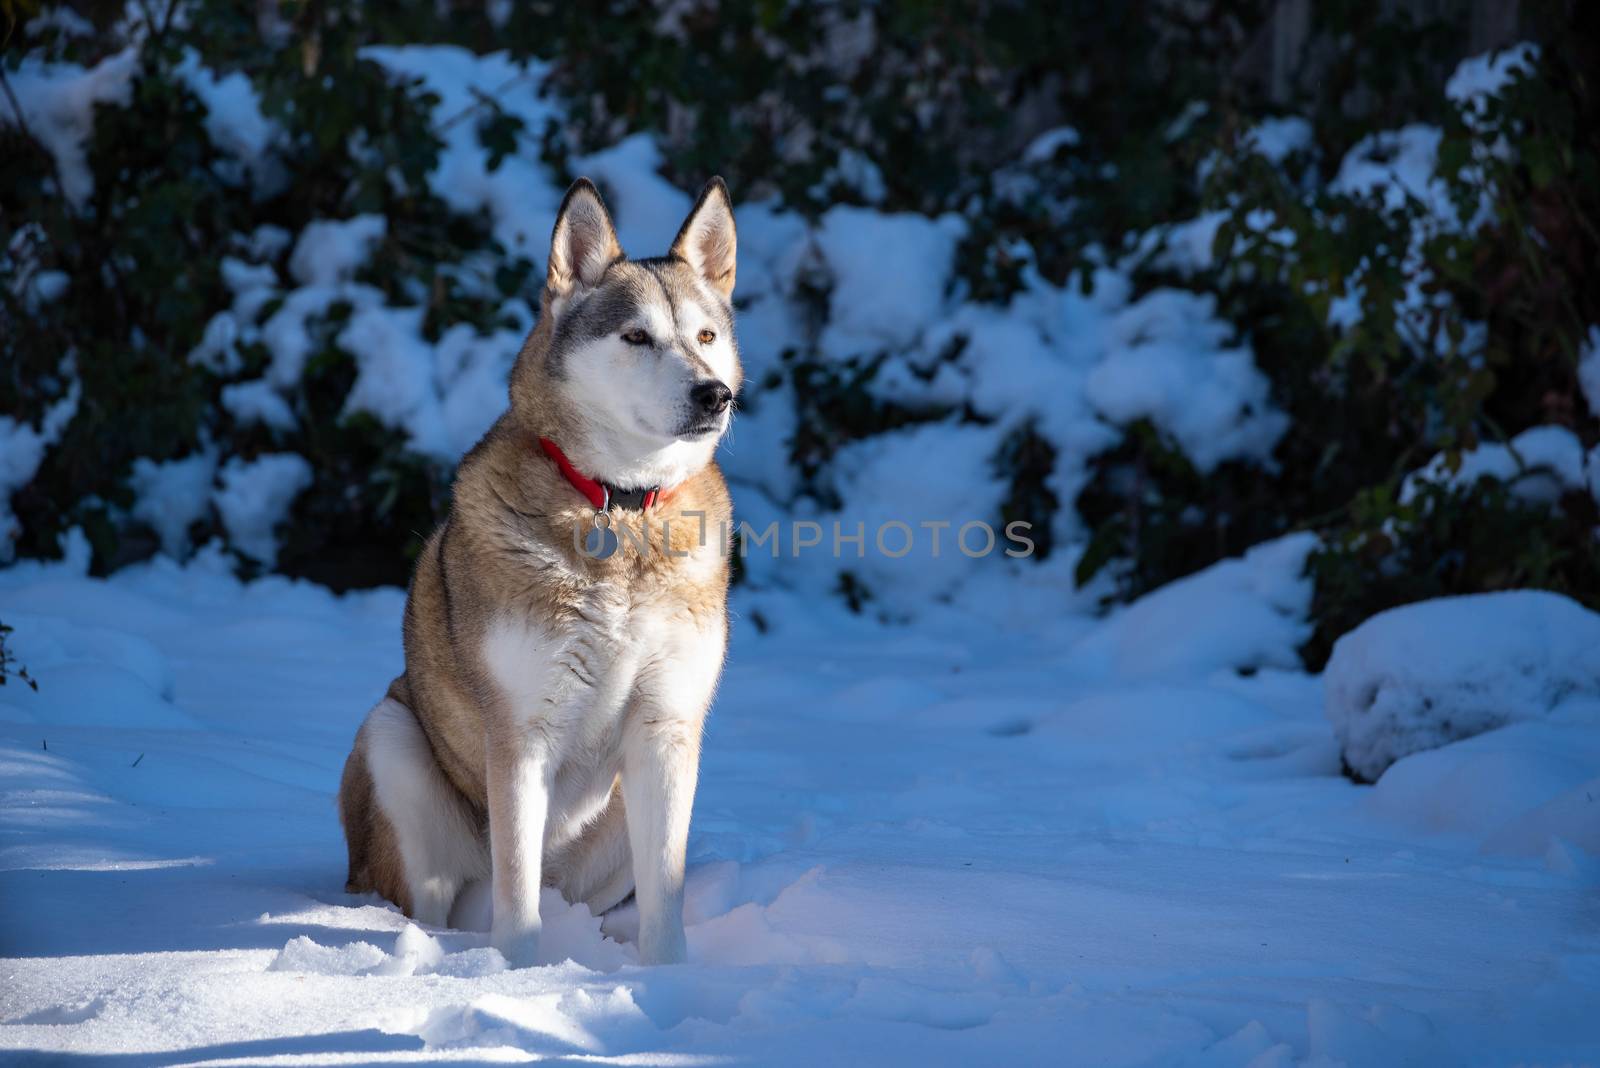 An Alaskan Husky Mix sitting in the snow with trees in the background.